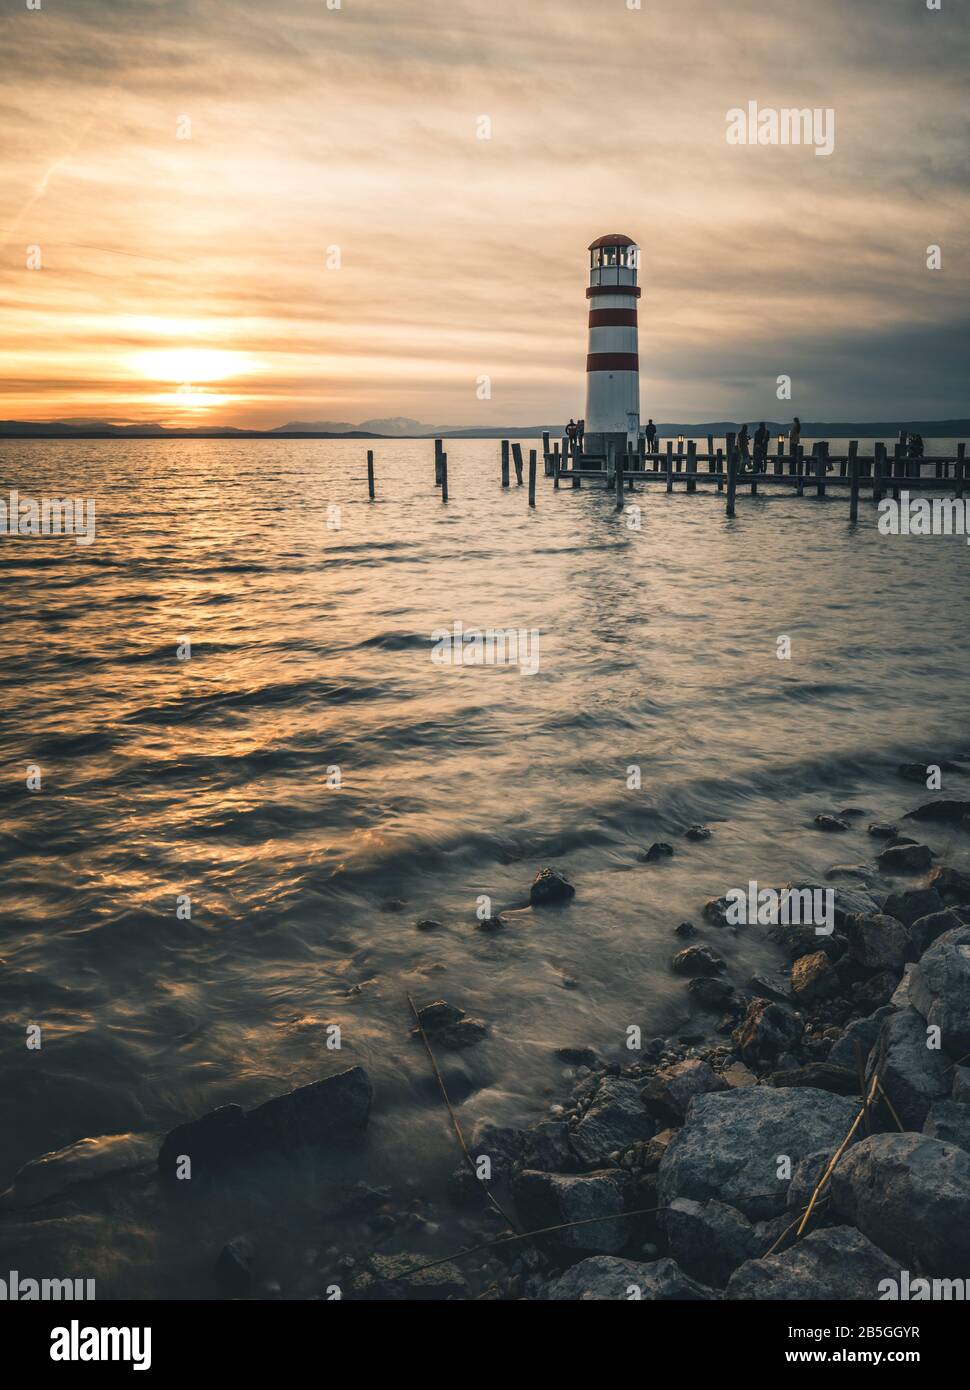 Lighthouse in Podersdorf am See at sunset, lake Neusiedler See, Burgenland, Austria Stock Photo